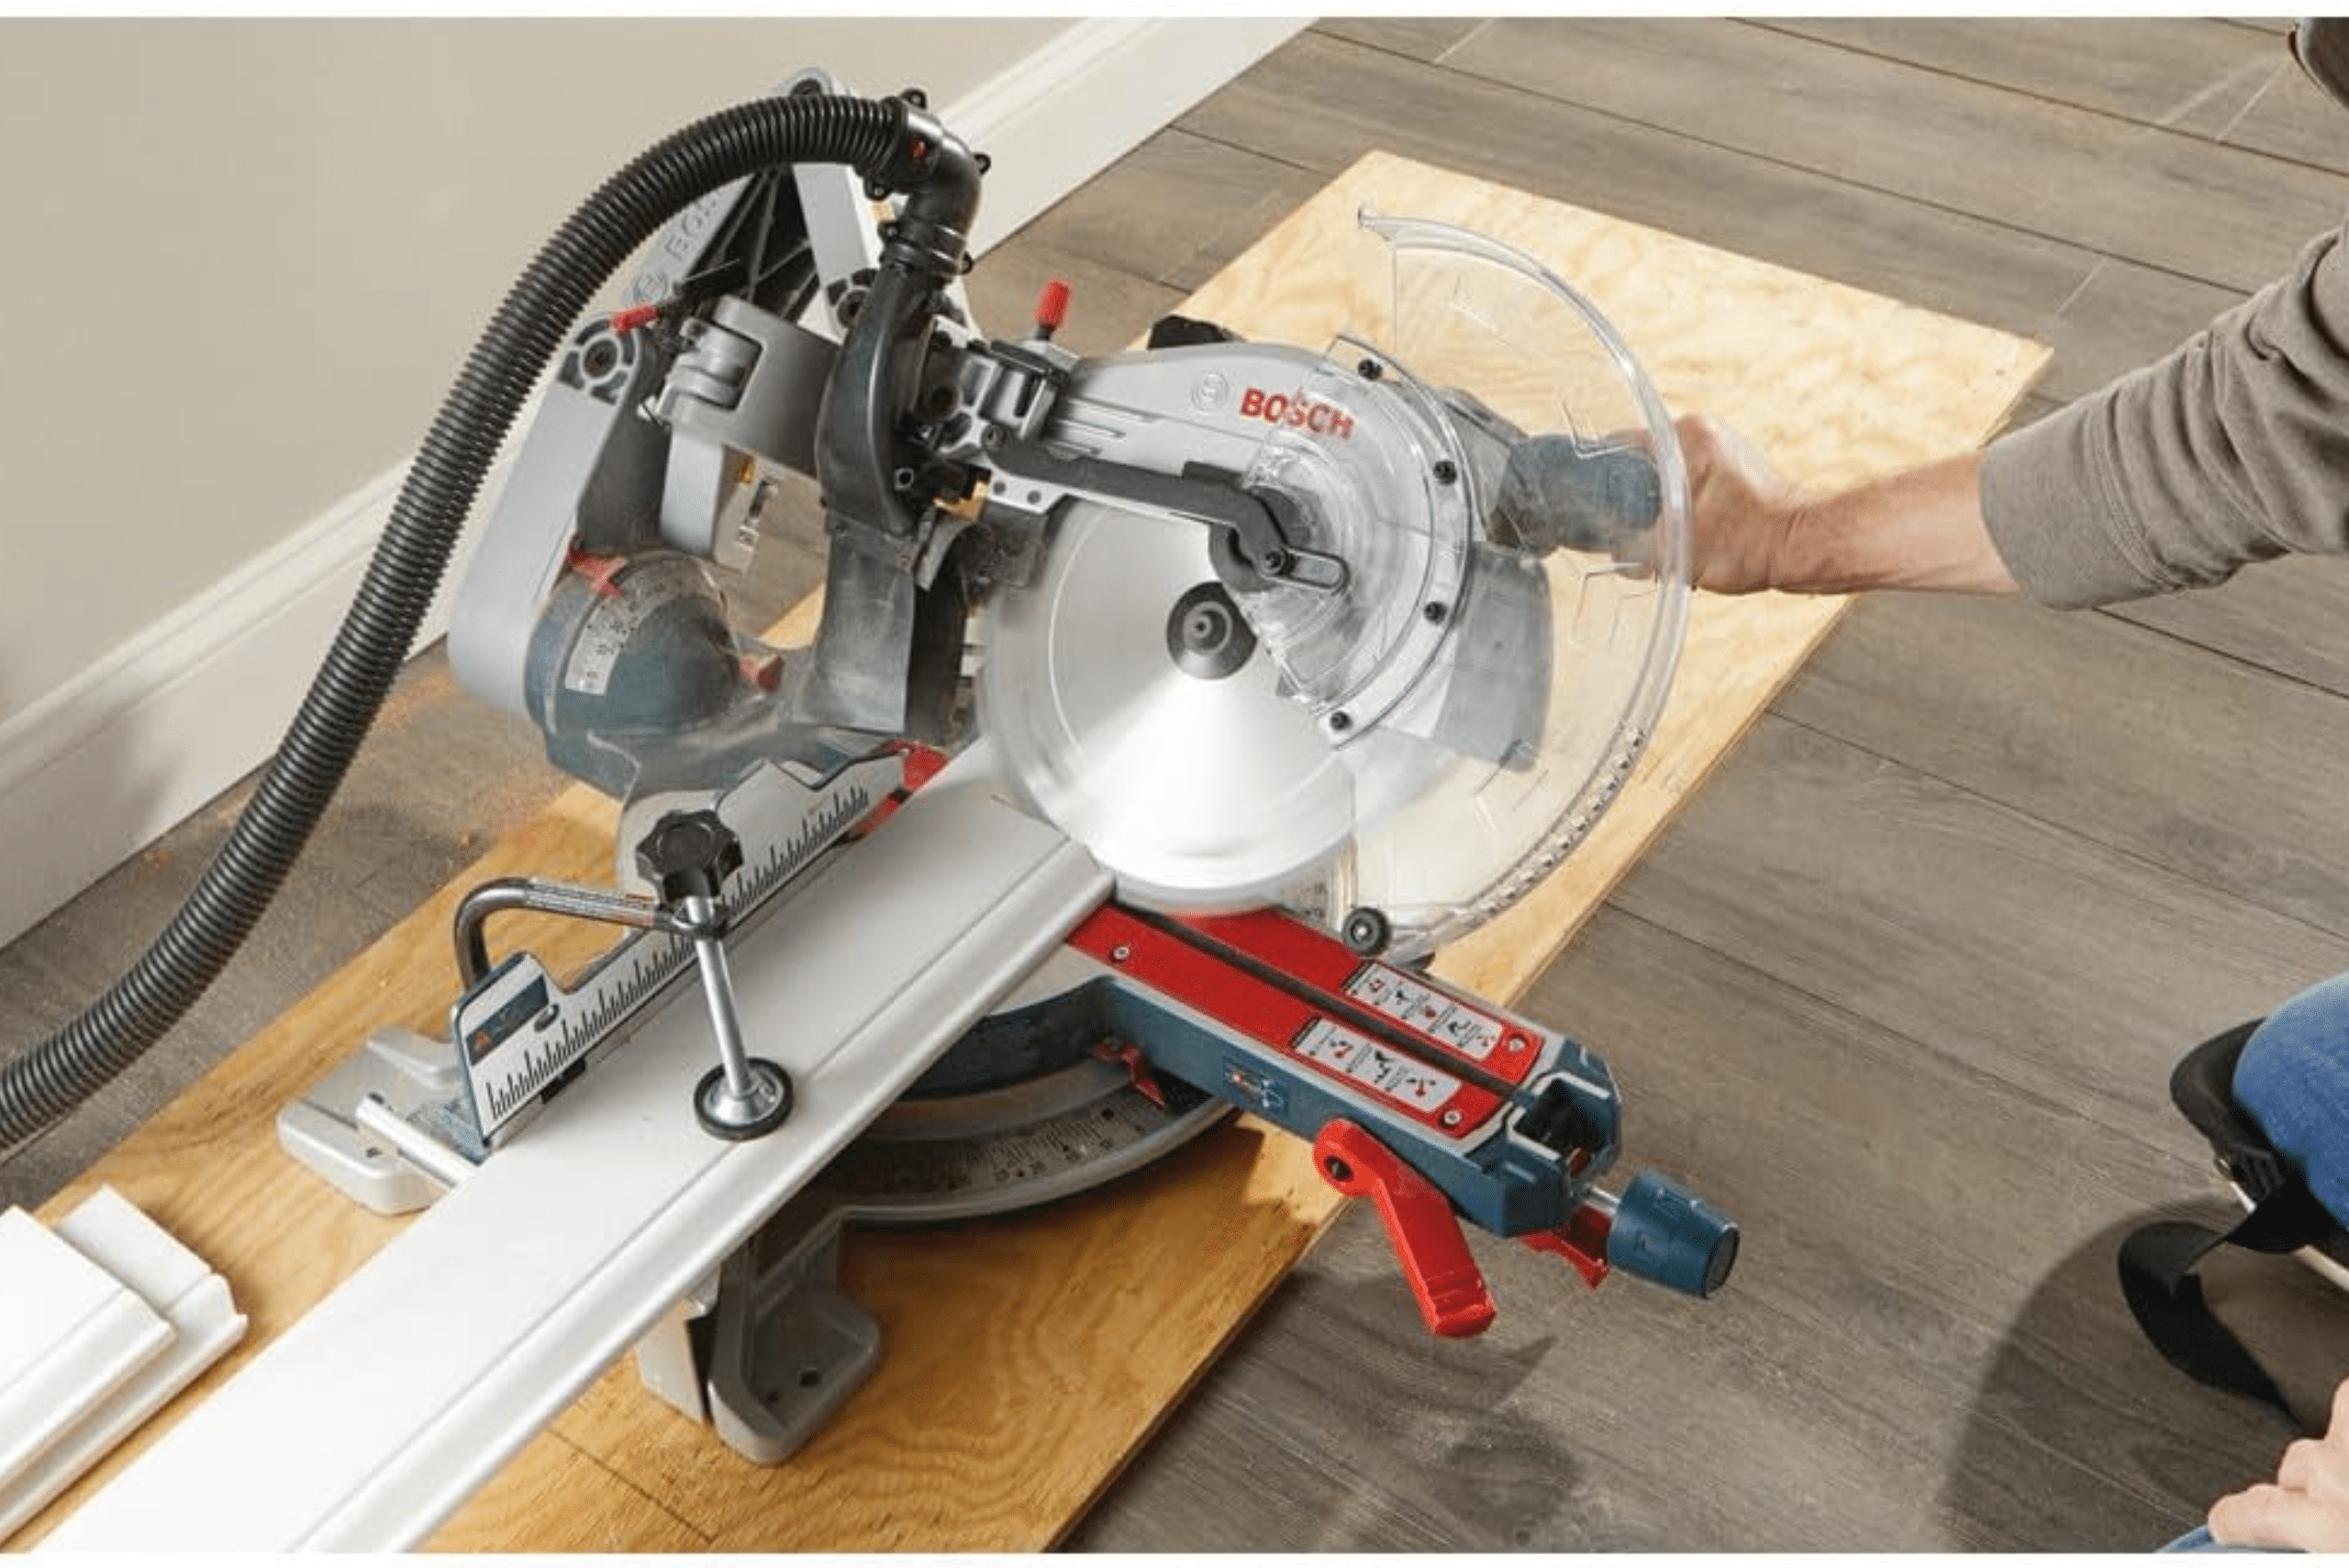 A miter saw from Bosch cutting a baseboard at an angle.